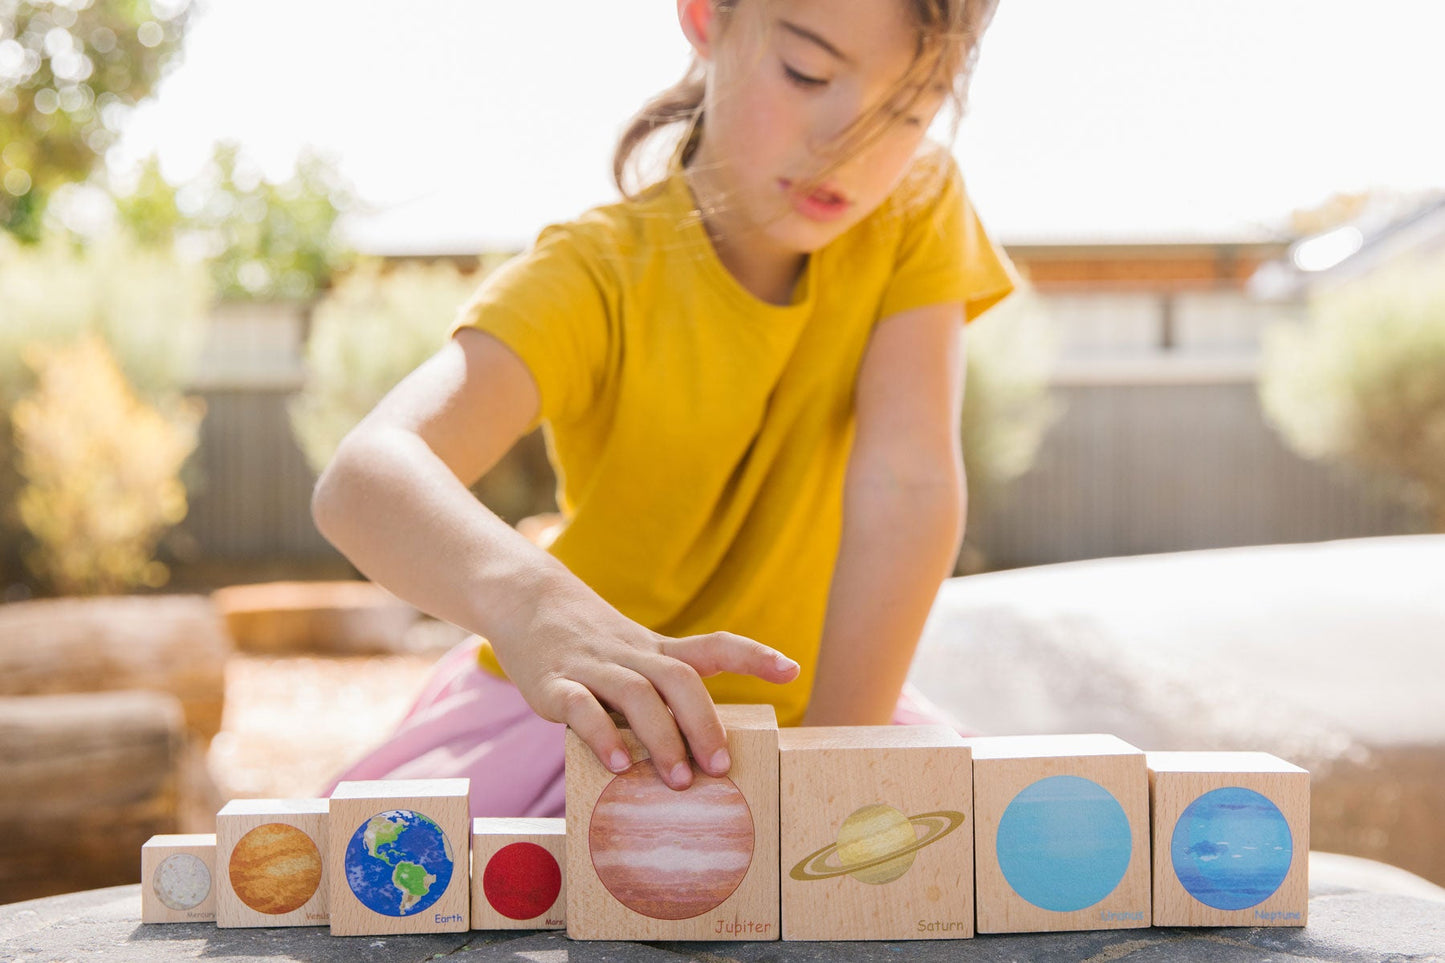 Play with Planets Space Block Set | Learning and Exploring Through Play